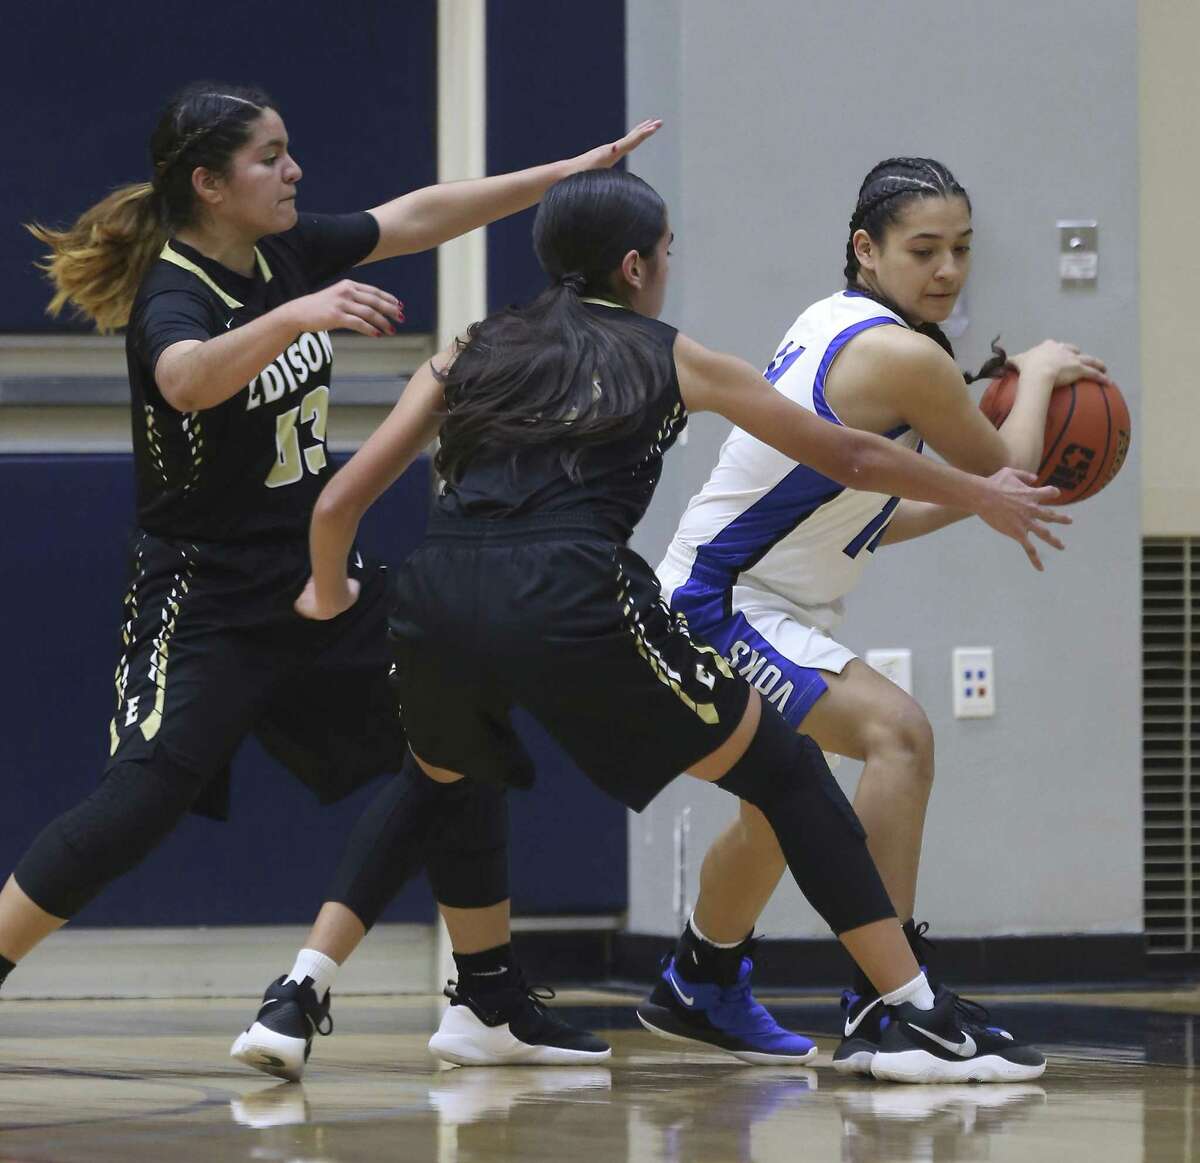 Lanier's Abigail Chamberlain, right, tries to pass Wednesday, Jan. 2, 2019 while under pressure from Edison's Jazlyn Balderas, left, and Madylynn Zavala during the Voks' game against the Golden Bears at the Alamo Convocation Center.